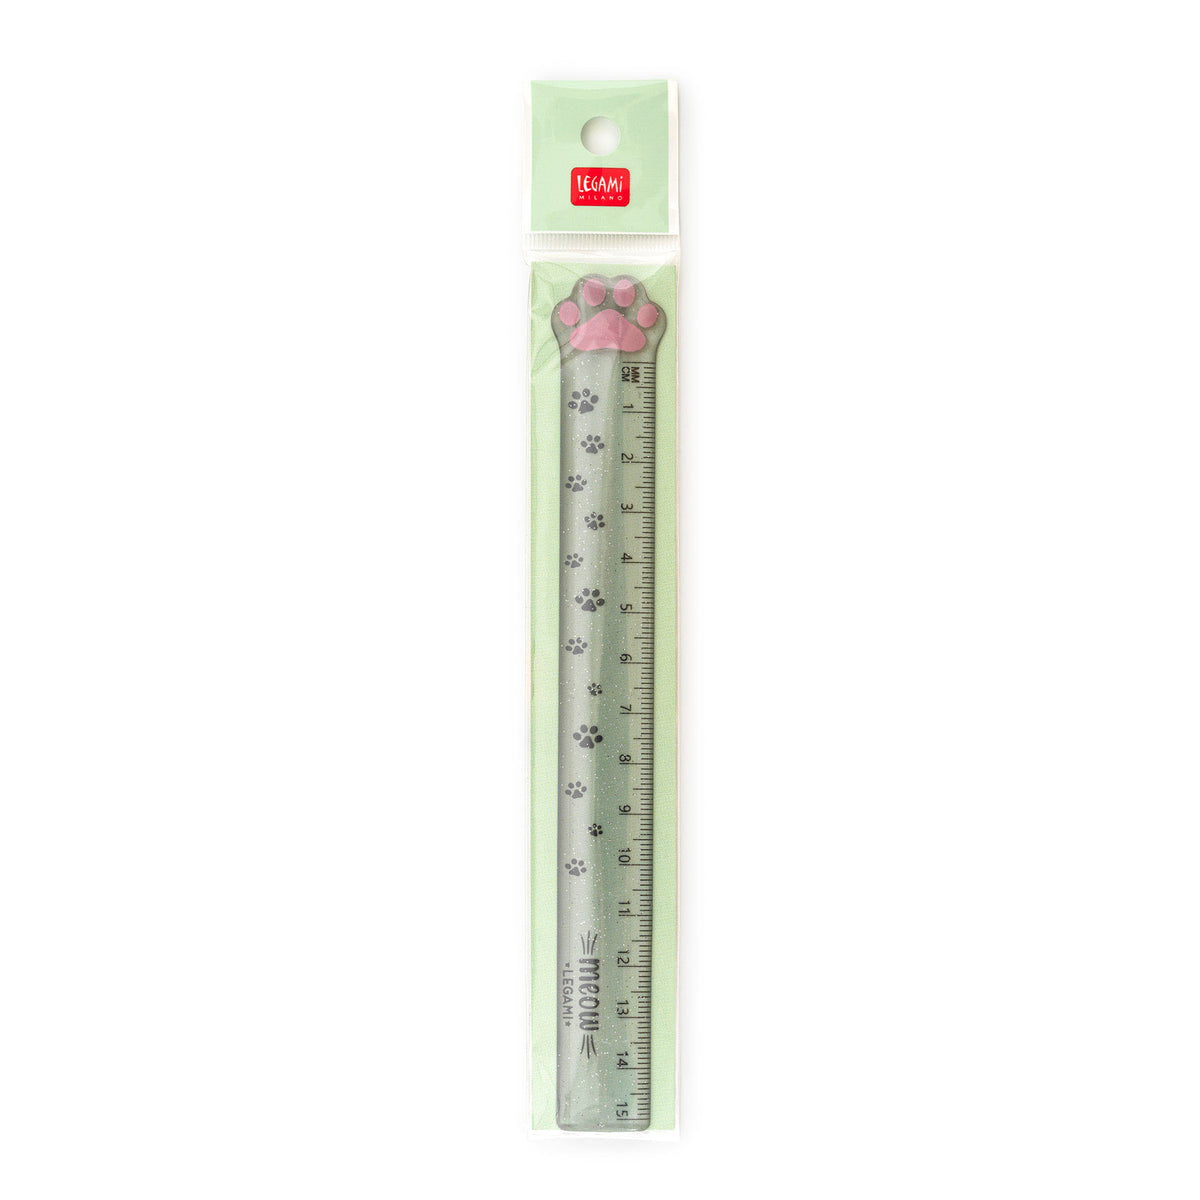 An image of a cat paw print ruler in light green packaging.